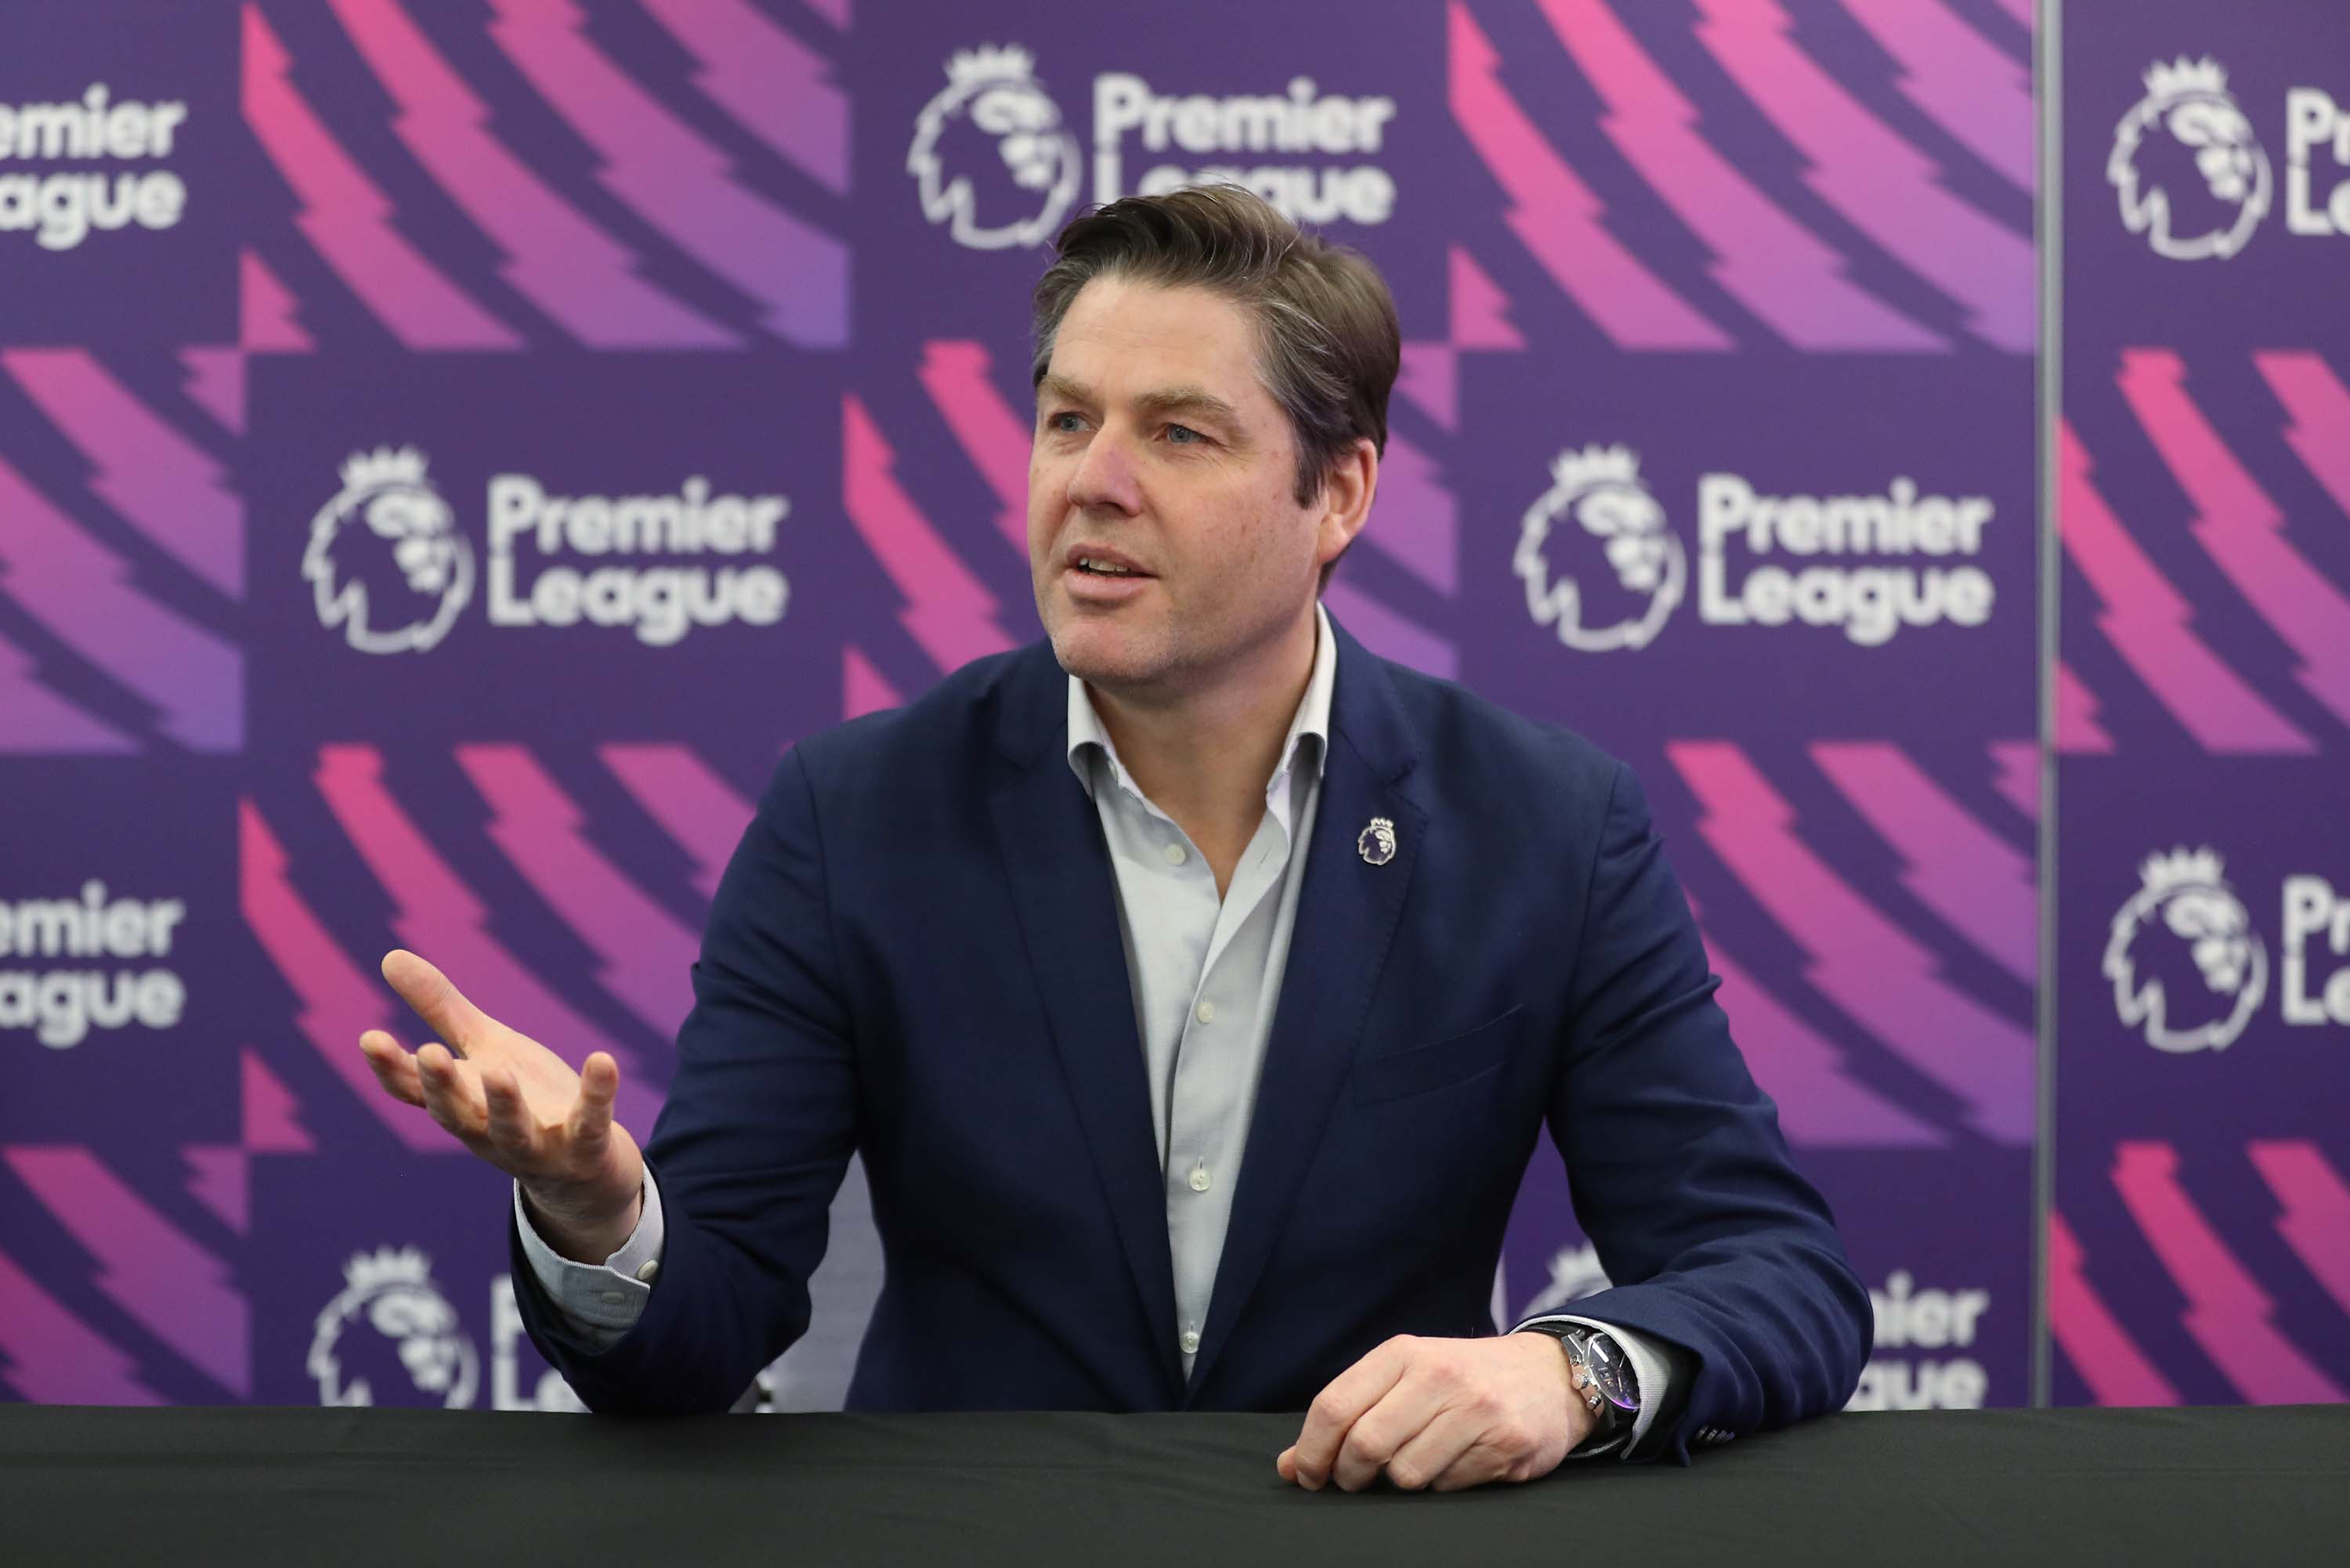 Richard Masters, Chief Executive of the English Premier League, addresses journalists during a media briefing on February 4, in London, England.